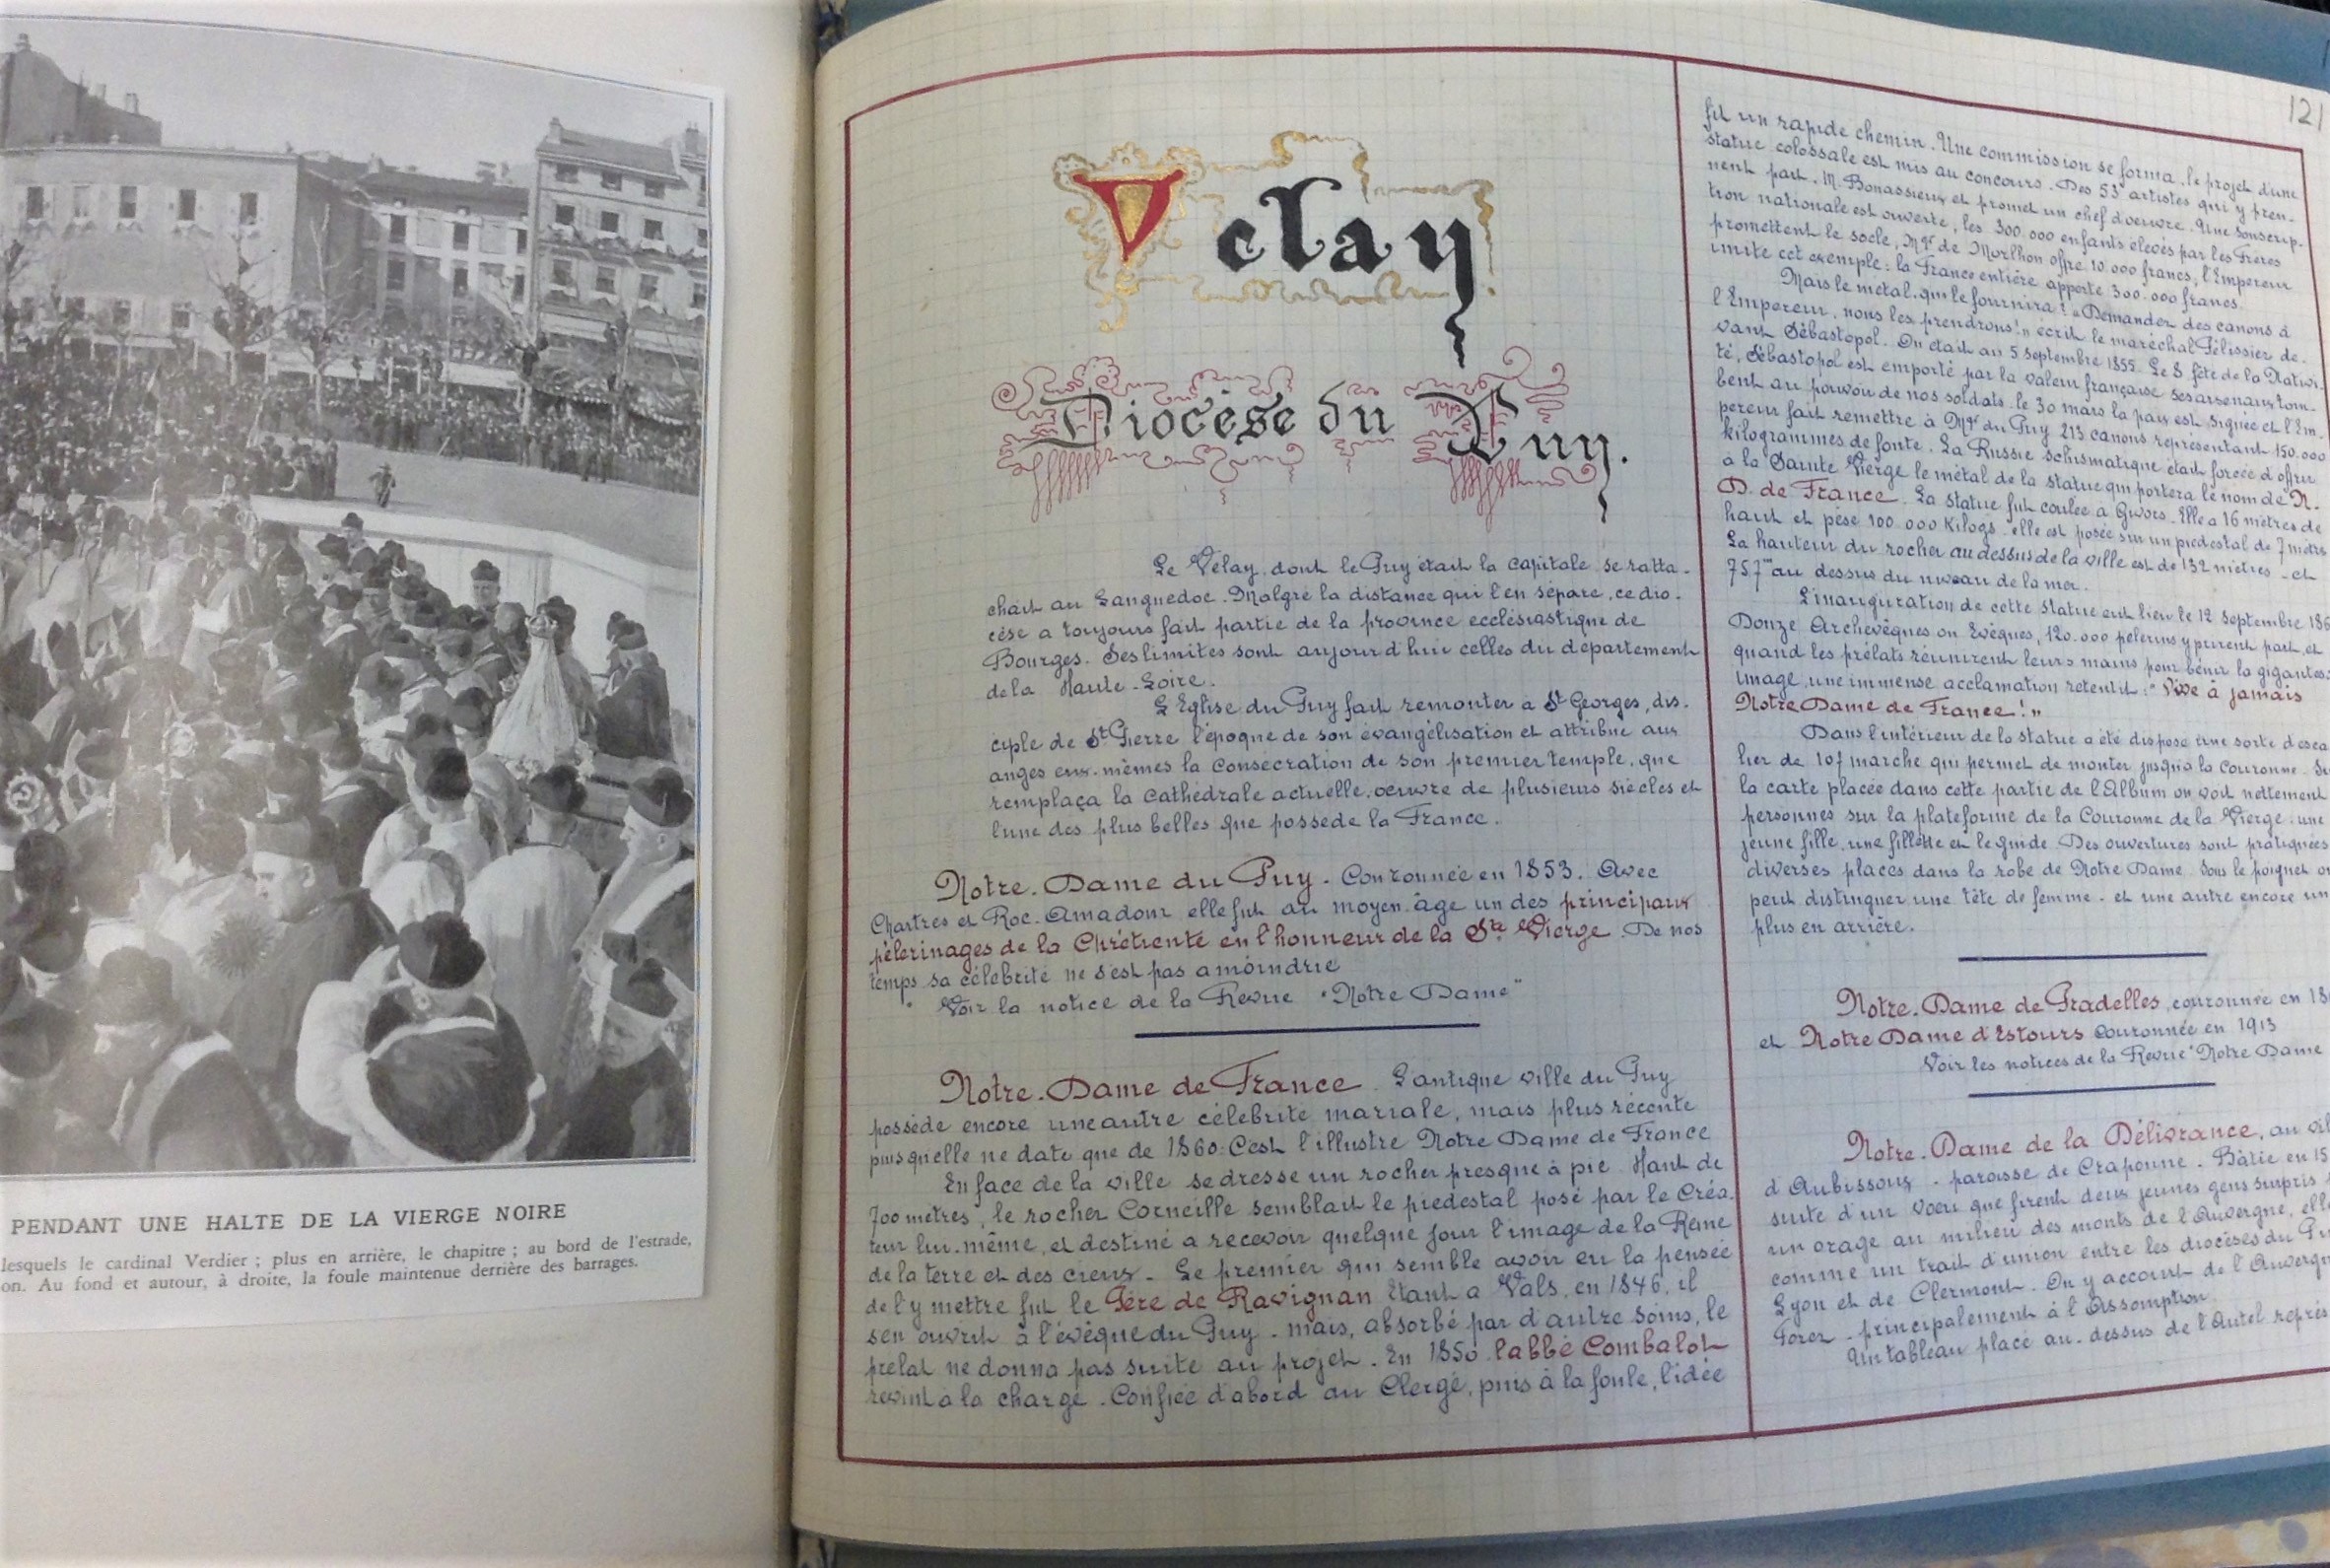 Open spread with black and white photo of a crowd on the left and the headline "Velay" with script righting on the right.